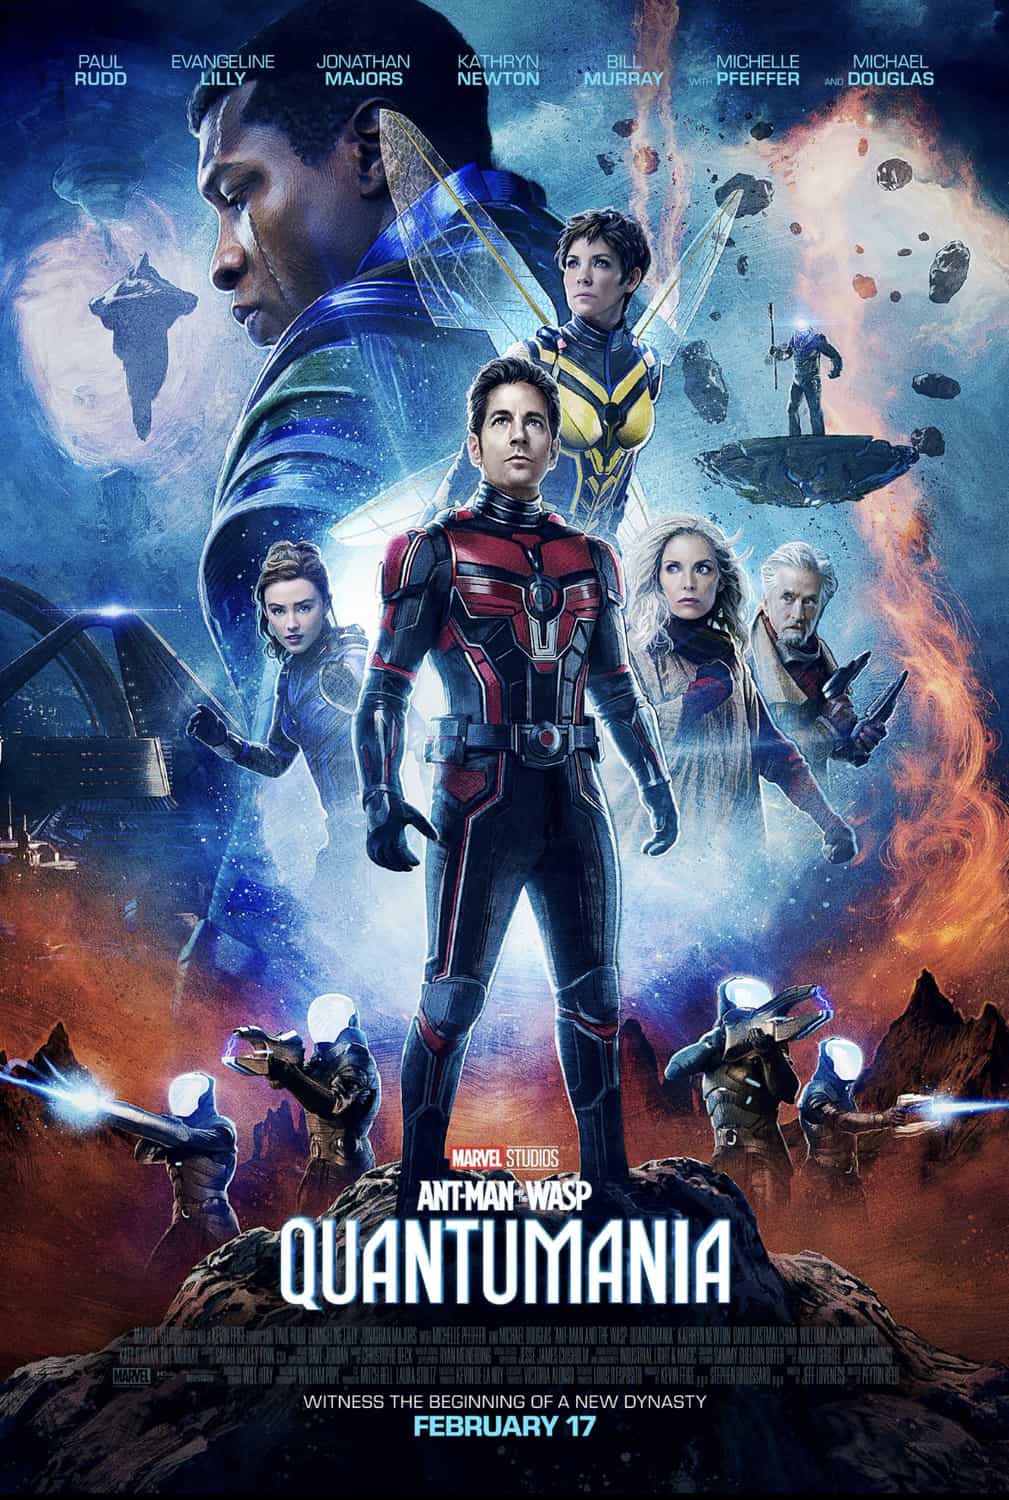 A new trailer has been released for Ant-Man and the Wasp: Quantumania starring Evangeline Lilly - movie UK release date 17th February 2023 #antmanandthewaspquantumania